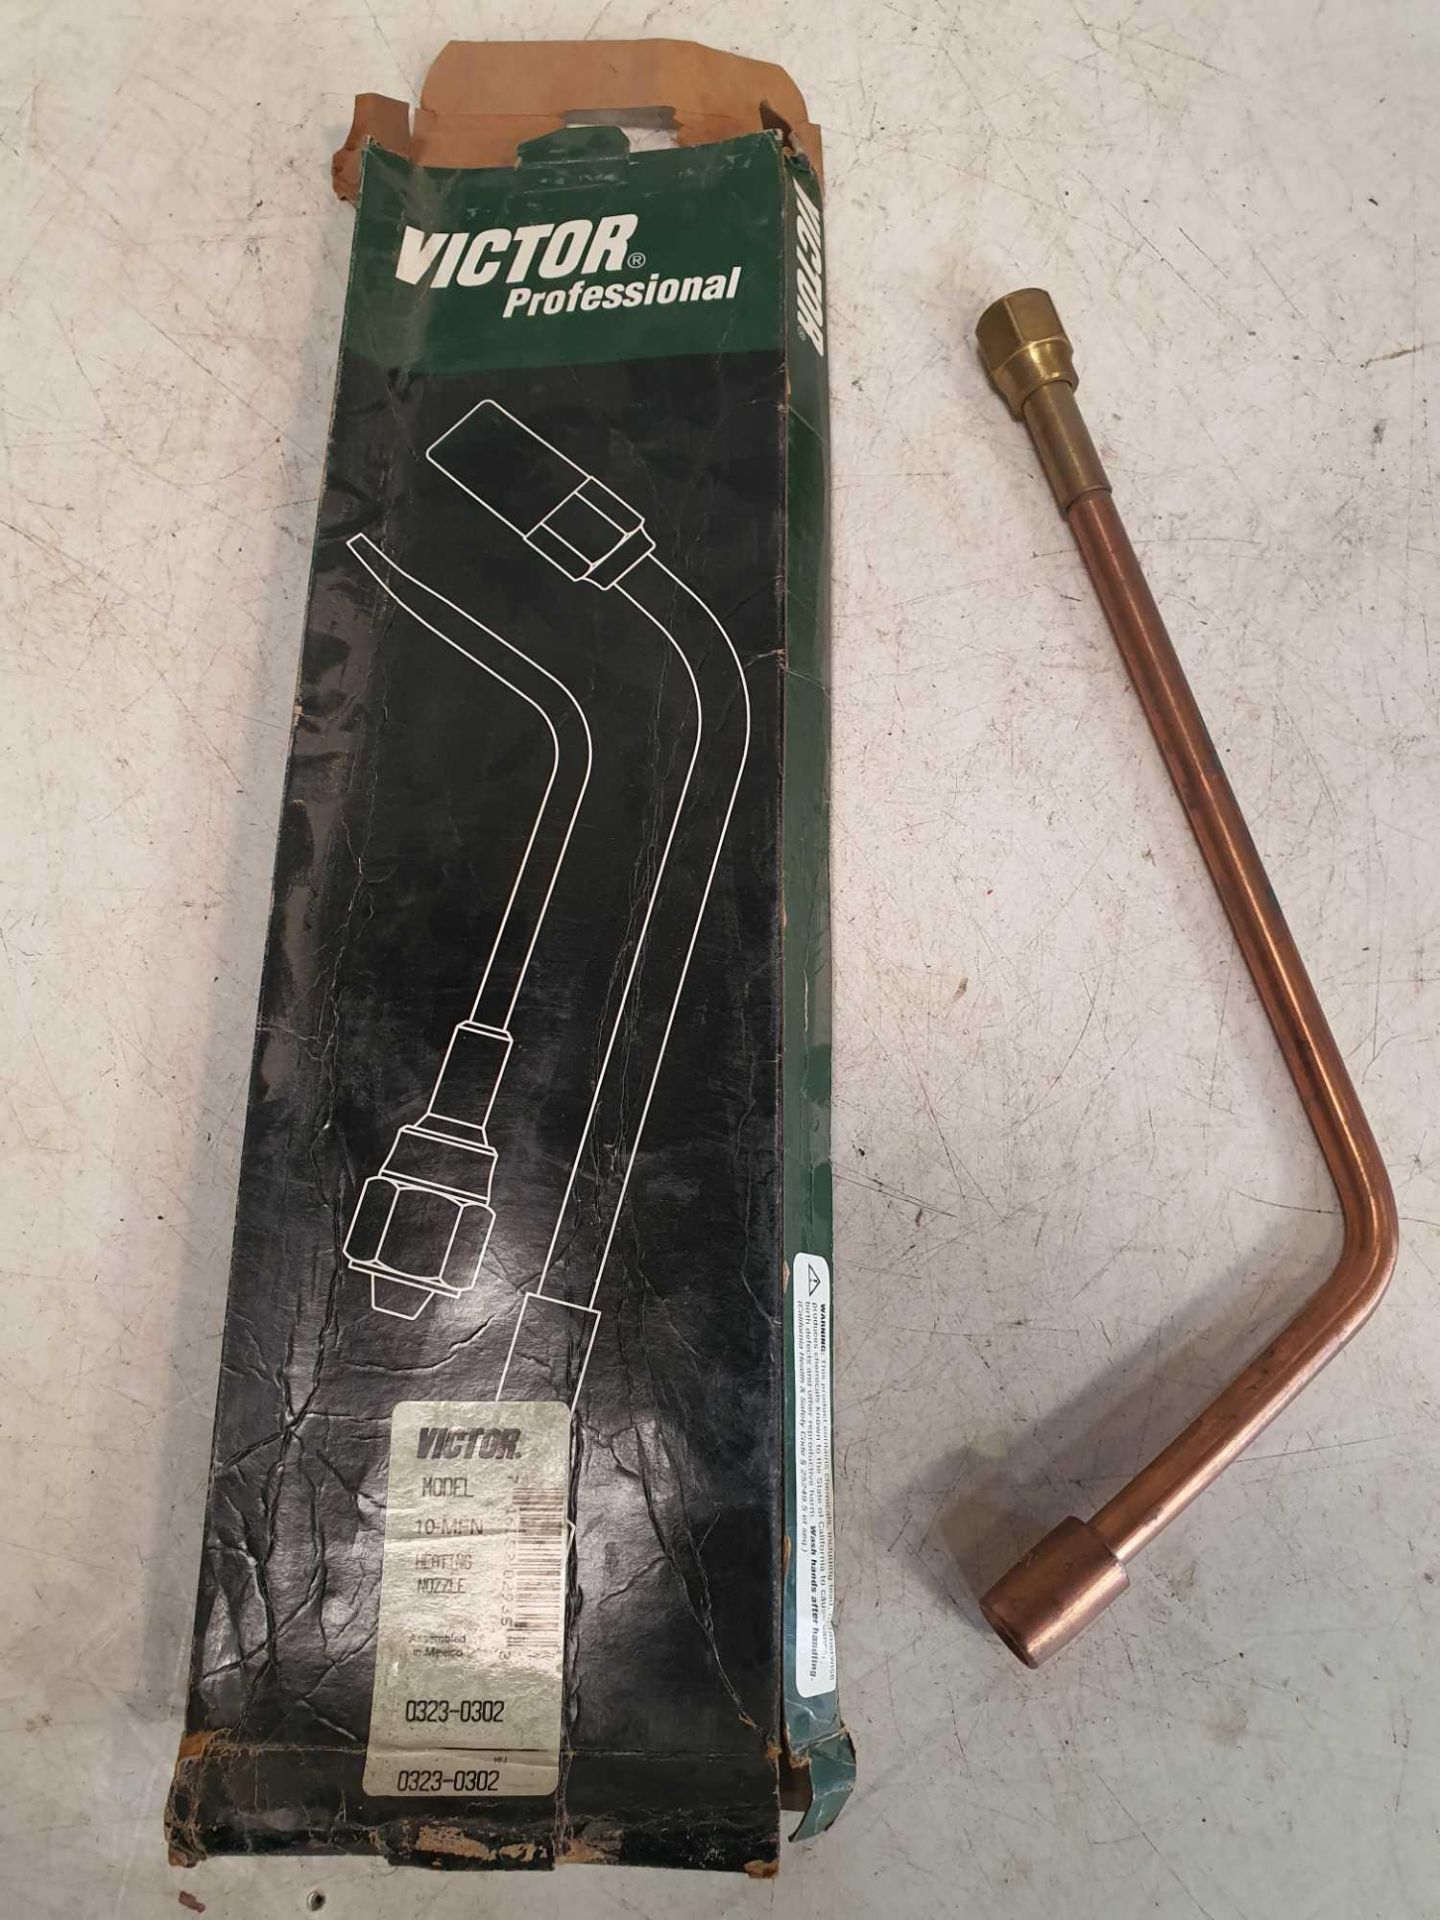 Victor professional heating nozzle